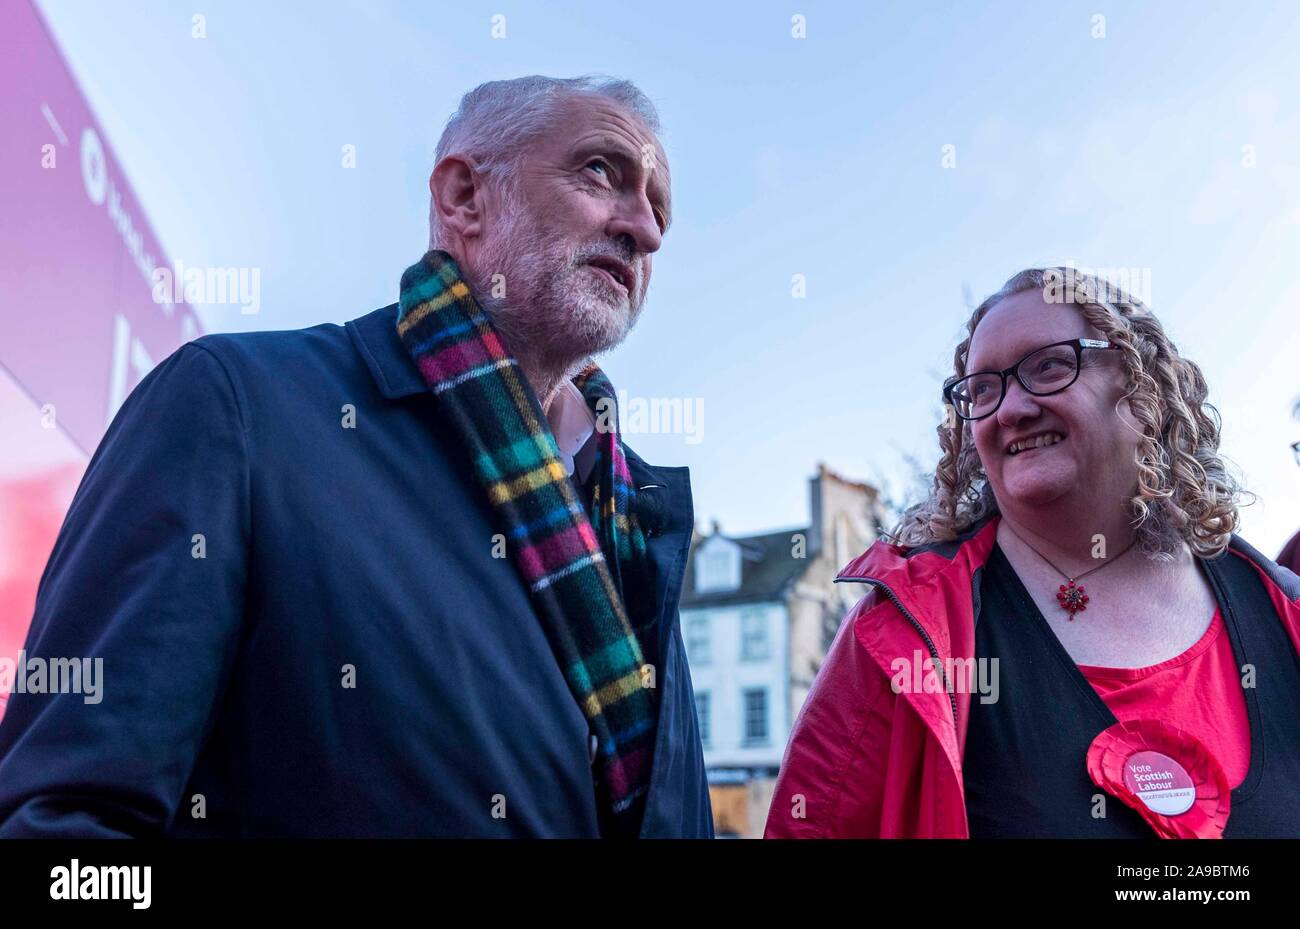 Linlithgow, United Kingdom. 14 November, 2019 Pictured: Jeremy Corbyn with Wendy Milne, candidate for Linlithgow and East Falkirk at Linlithgow Cross in Linlithgow. Labour leader, Jeremy Corbyn continues his visit to Scotland as part of his UK Election campaign. Credit: Rich Dyson/Alamy Live News Stock Photo